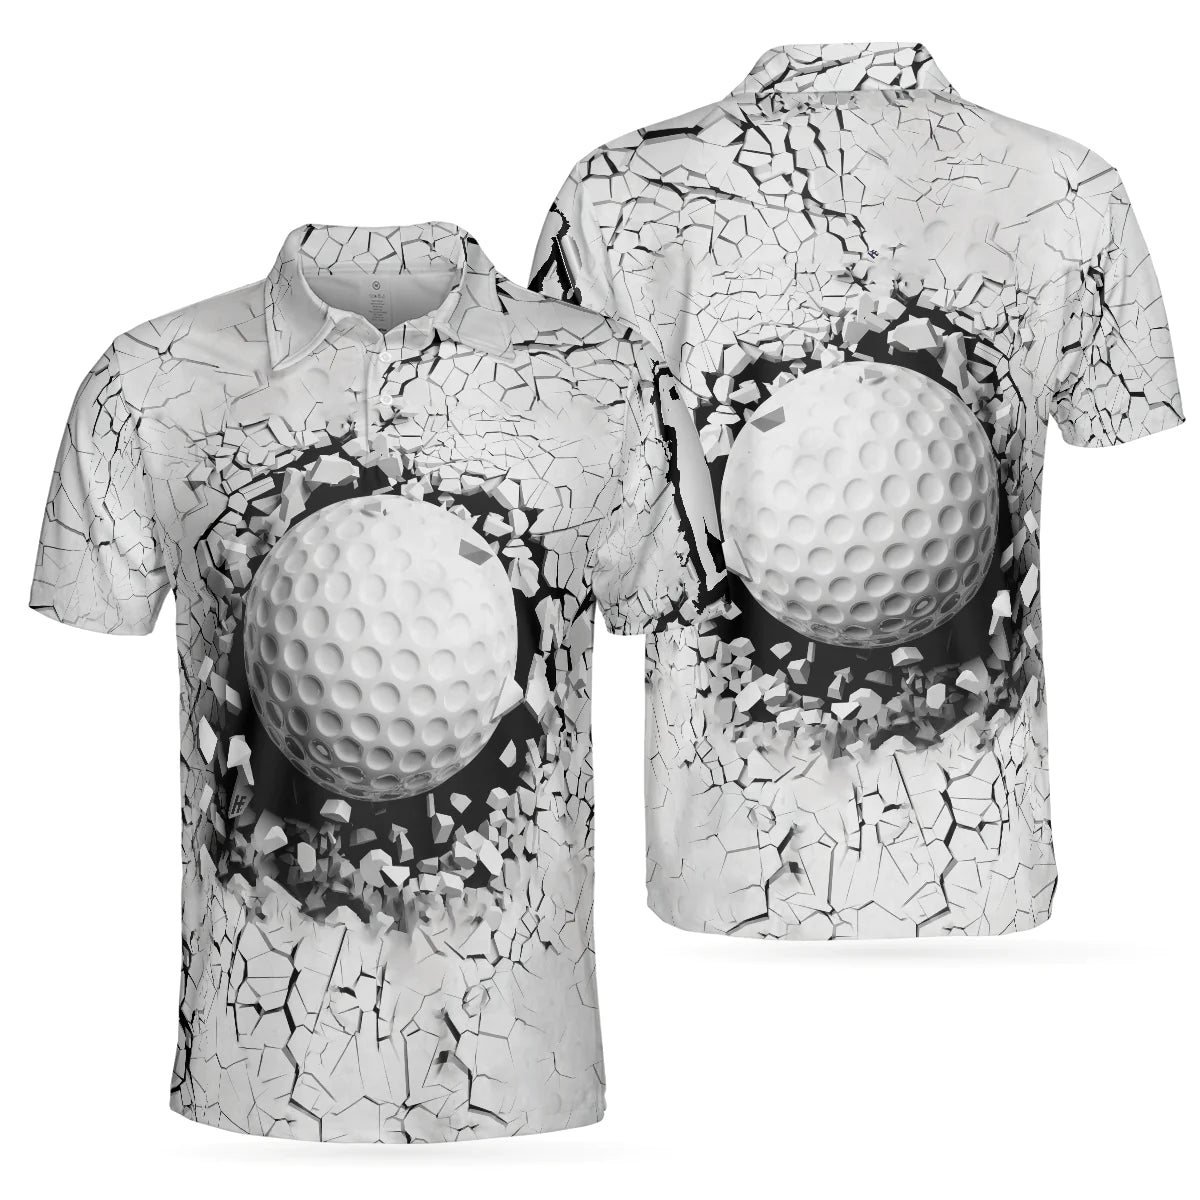 the best golf gift for men an elegant and unique golf breaker polo shirt for golfers gp370 oeetc